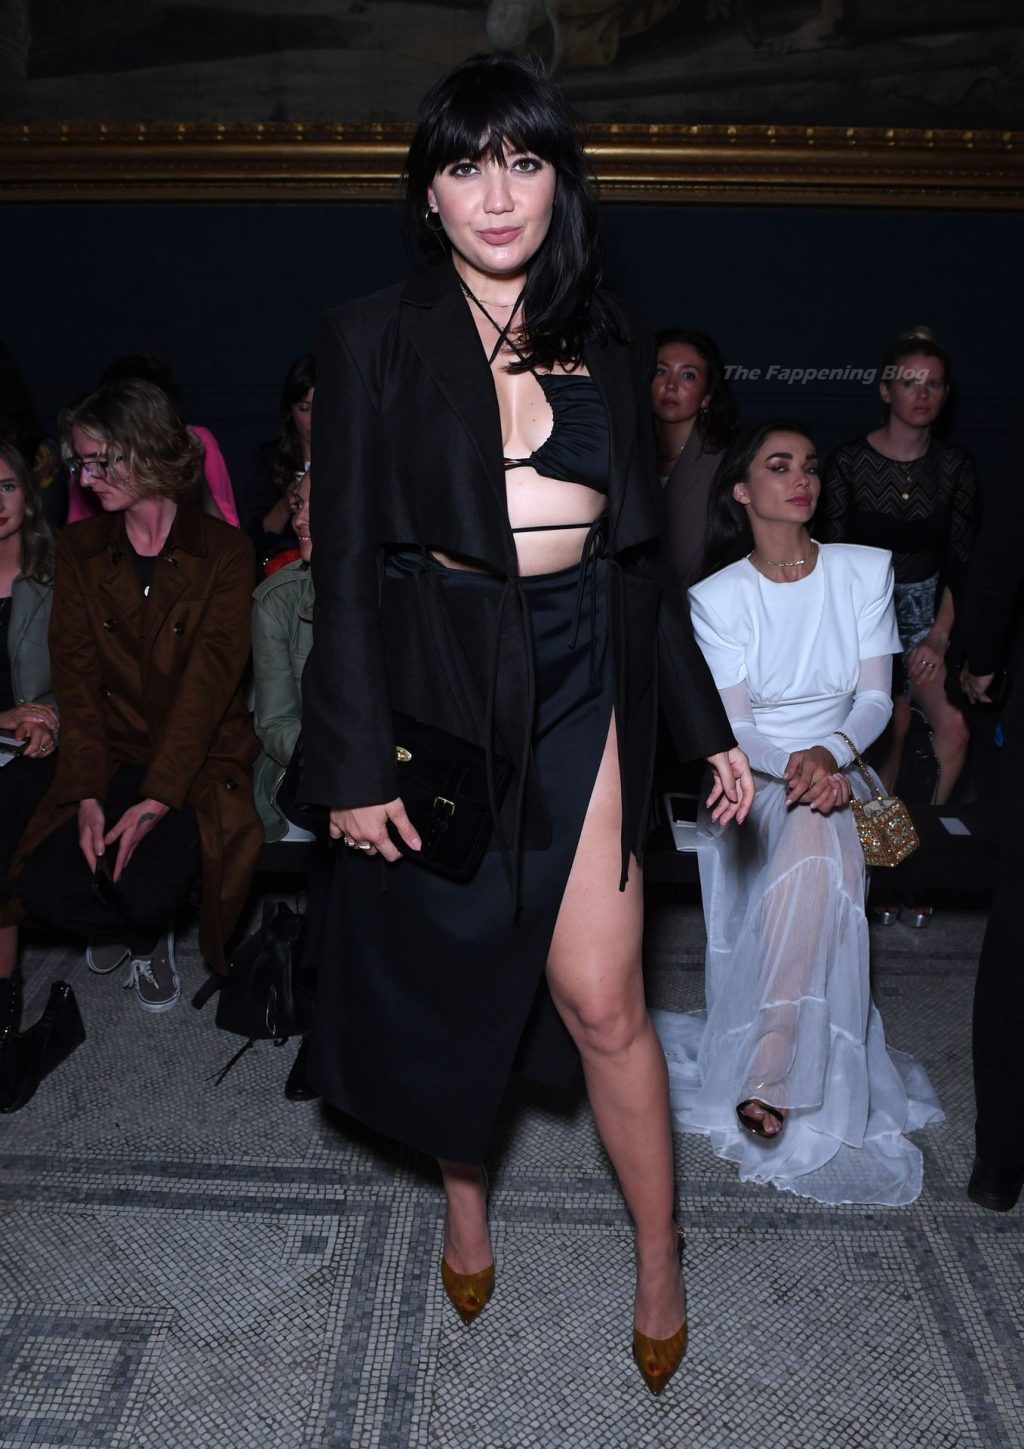 Daisy Lowe Flaunts Her Sexy Legs As She Attends Richard Malone x Mulberry Show in London (71 Photos)